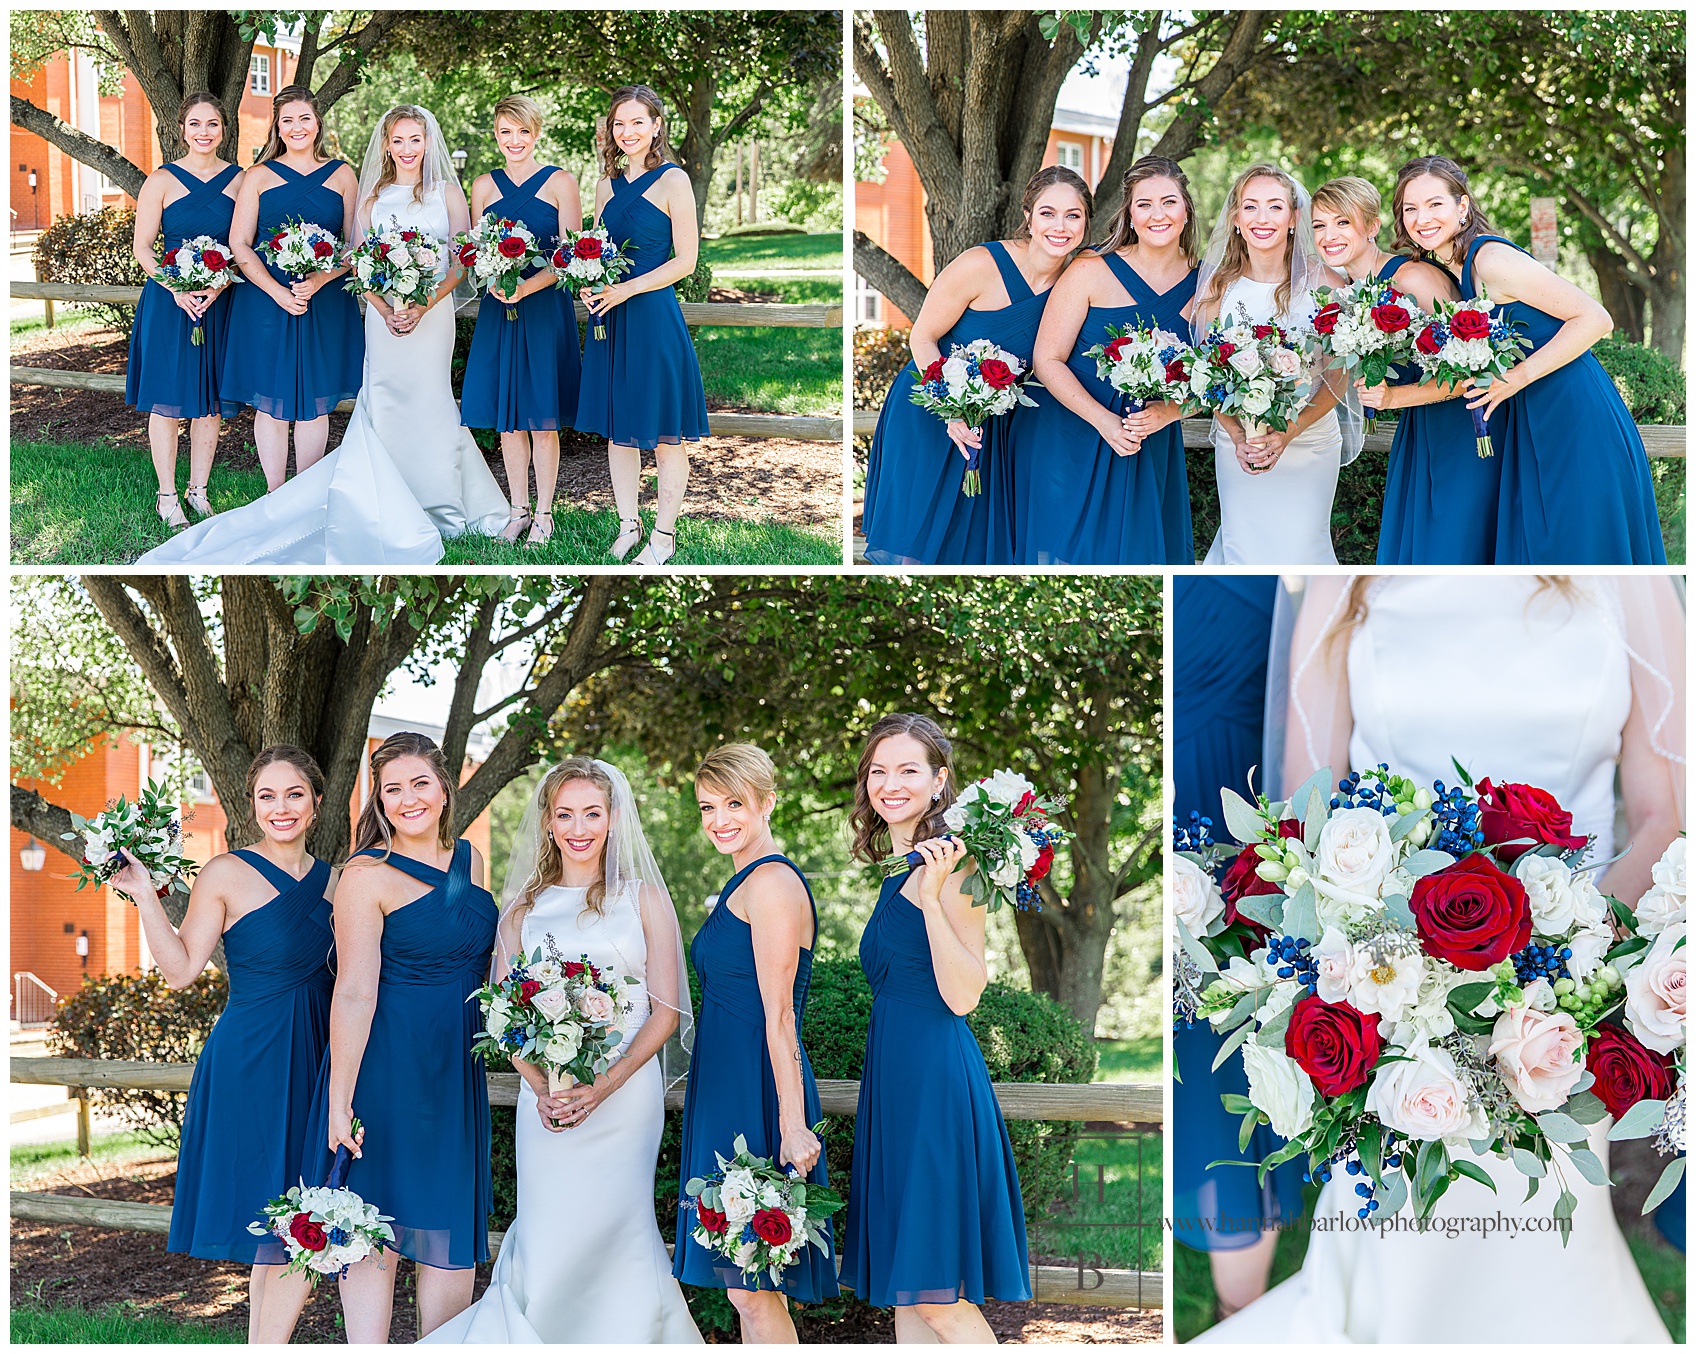 Ladies of the Bridal Party